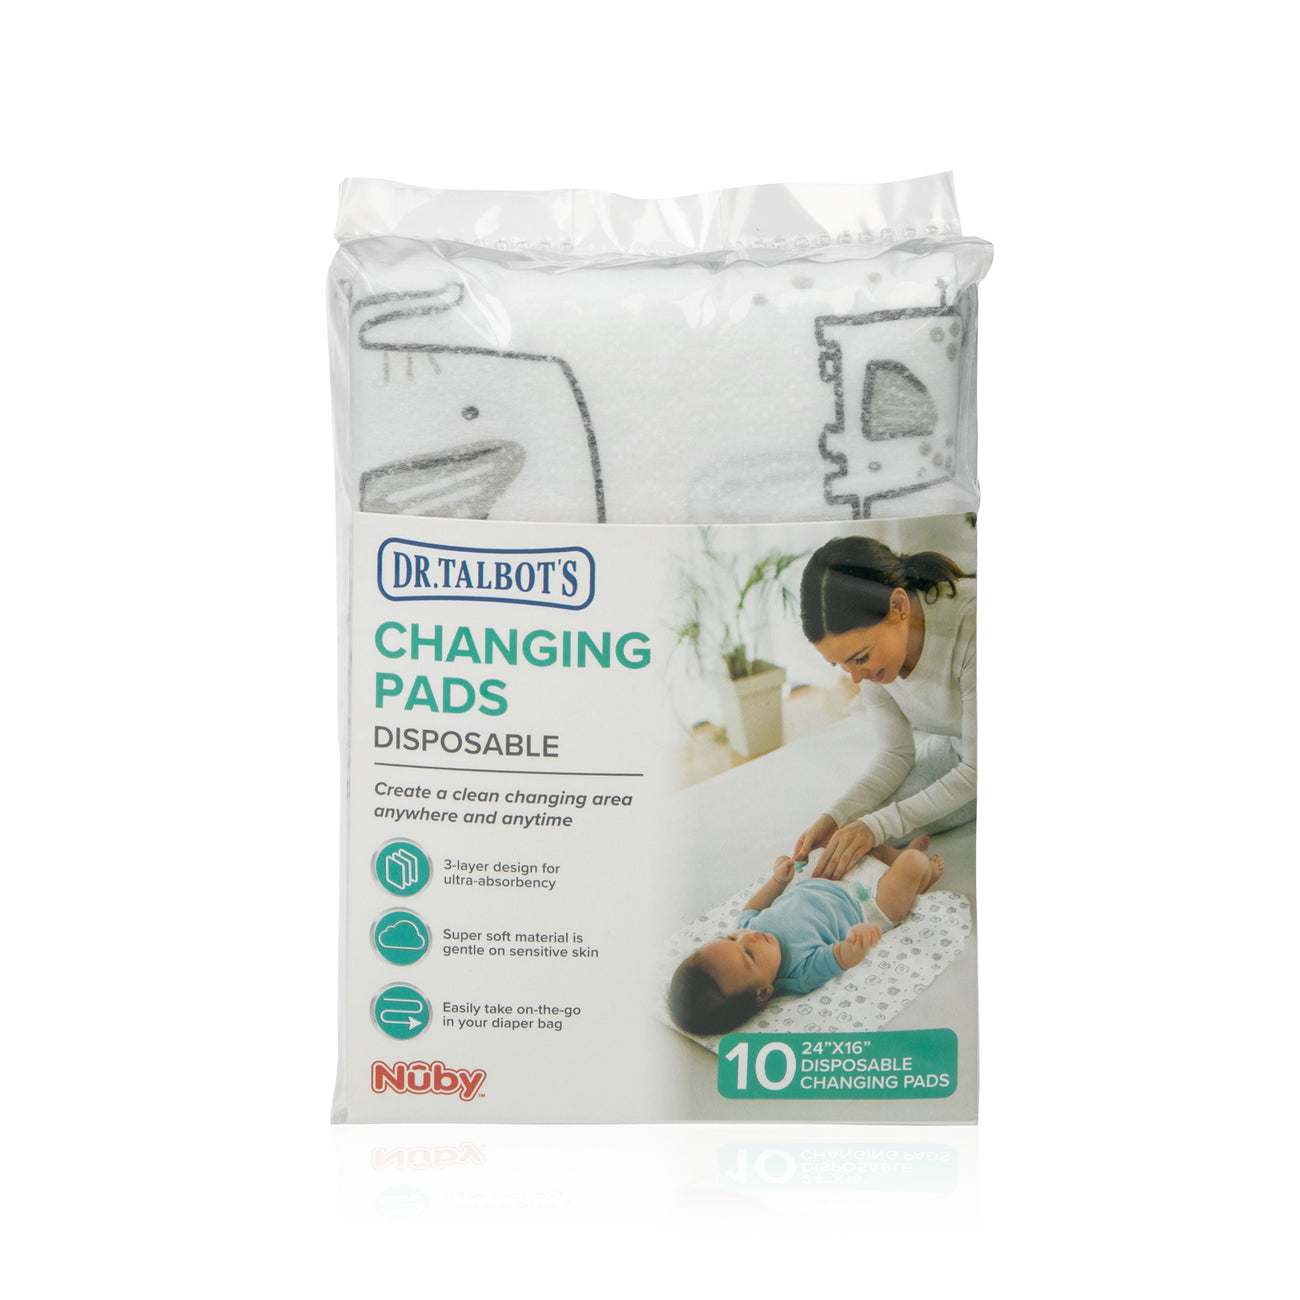 Disposable Changing Pads - 10 Pack - Dr Talbot's US